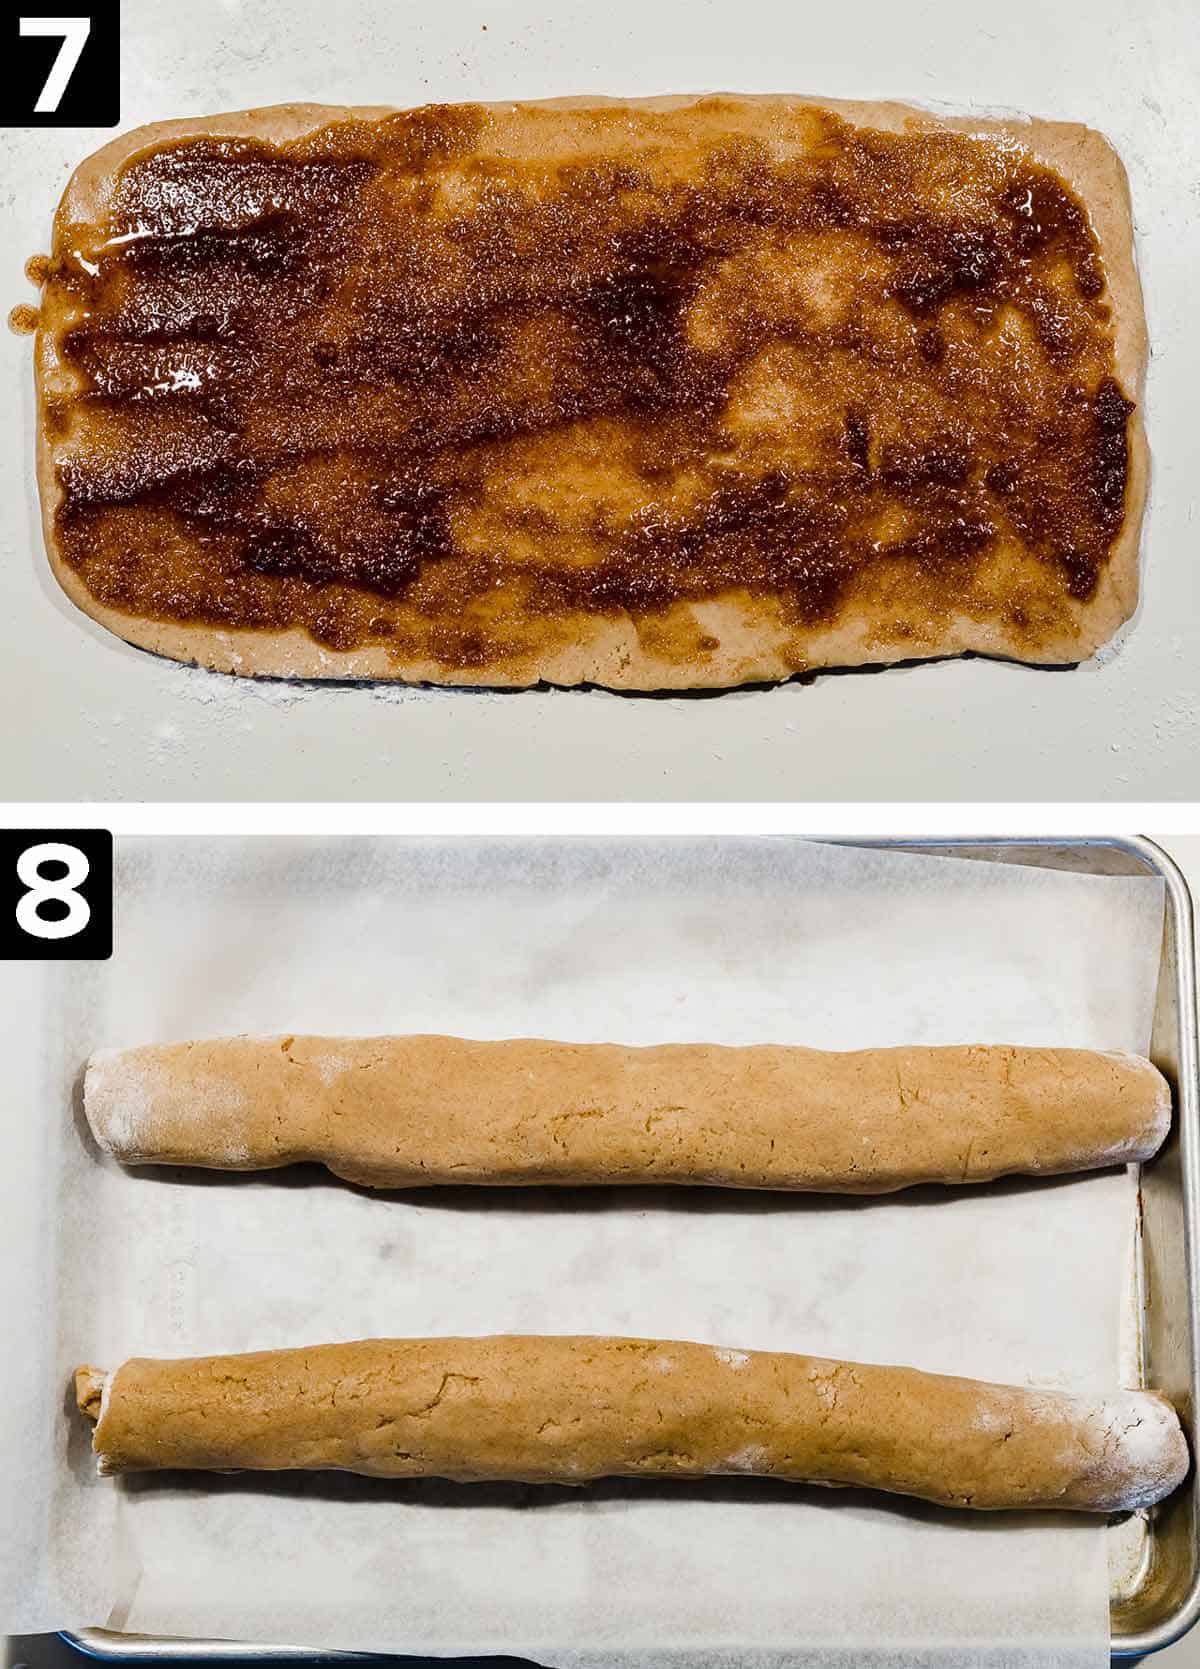 Cinnamon Roll Cookie dough rolled into a rectangle with cinnamon sugar mixture spread overtop, bottom photo shows the dough rolled into a log.